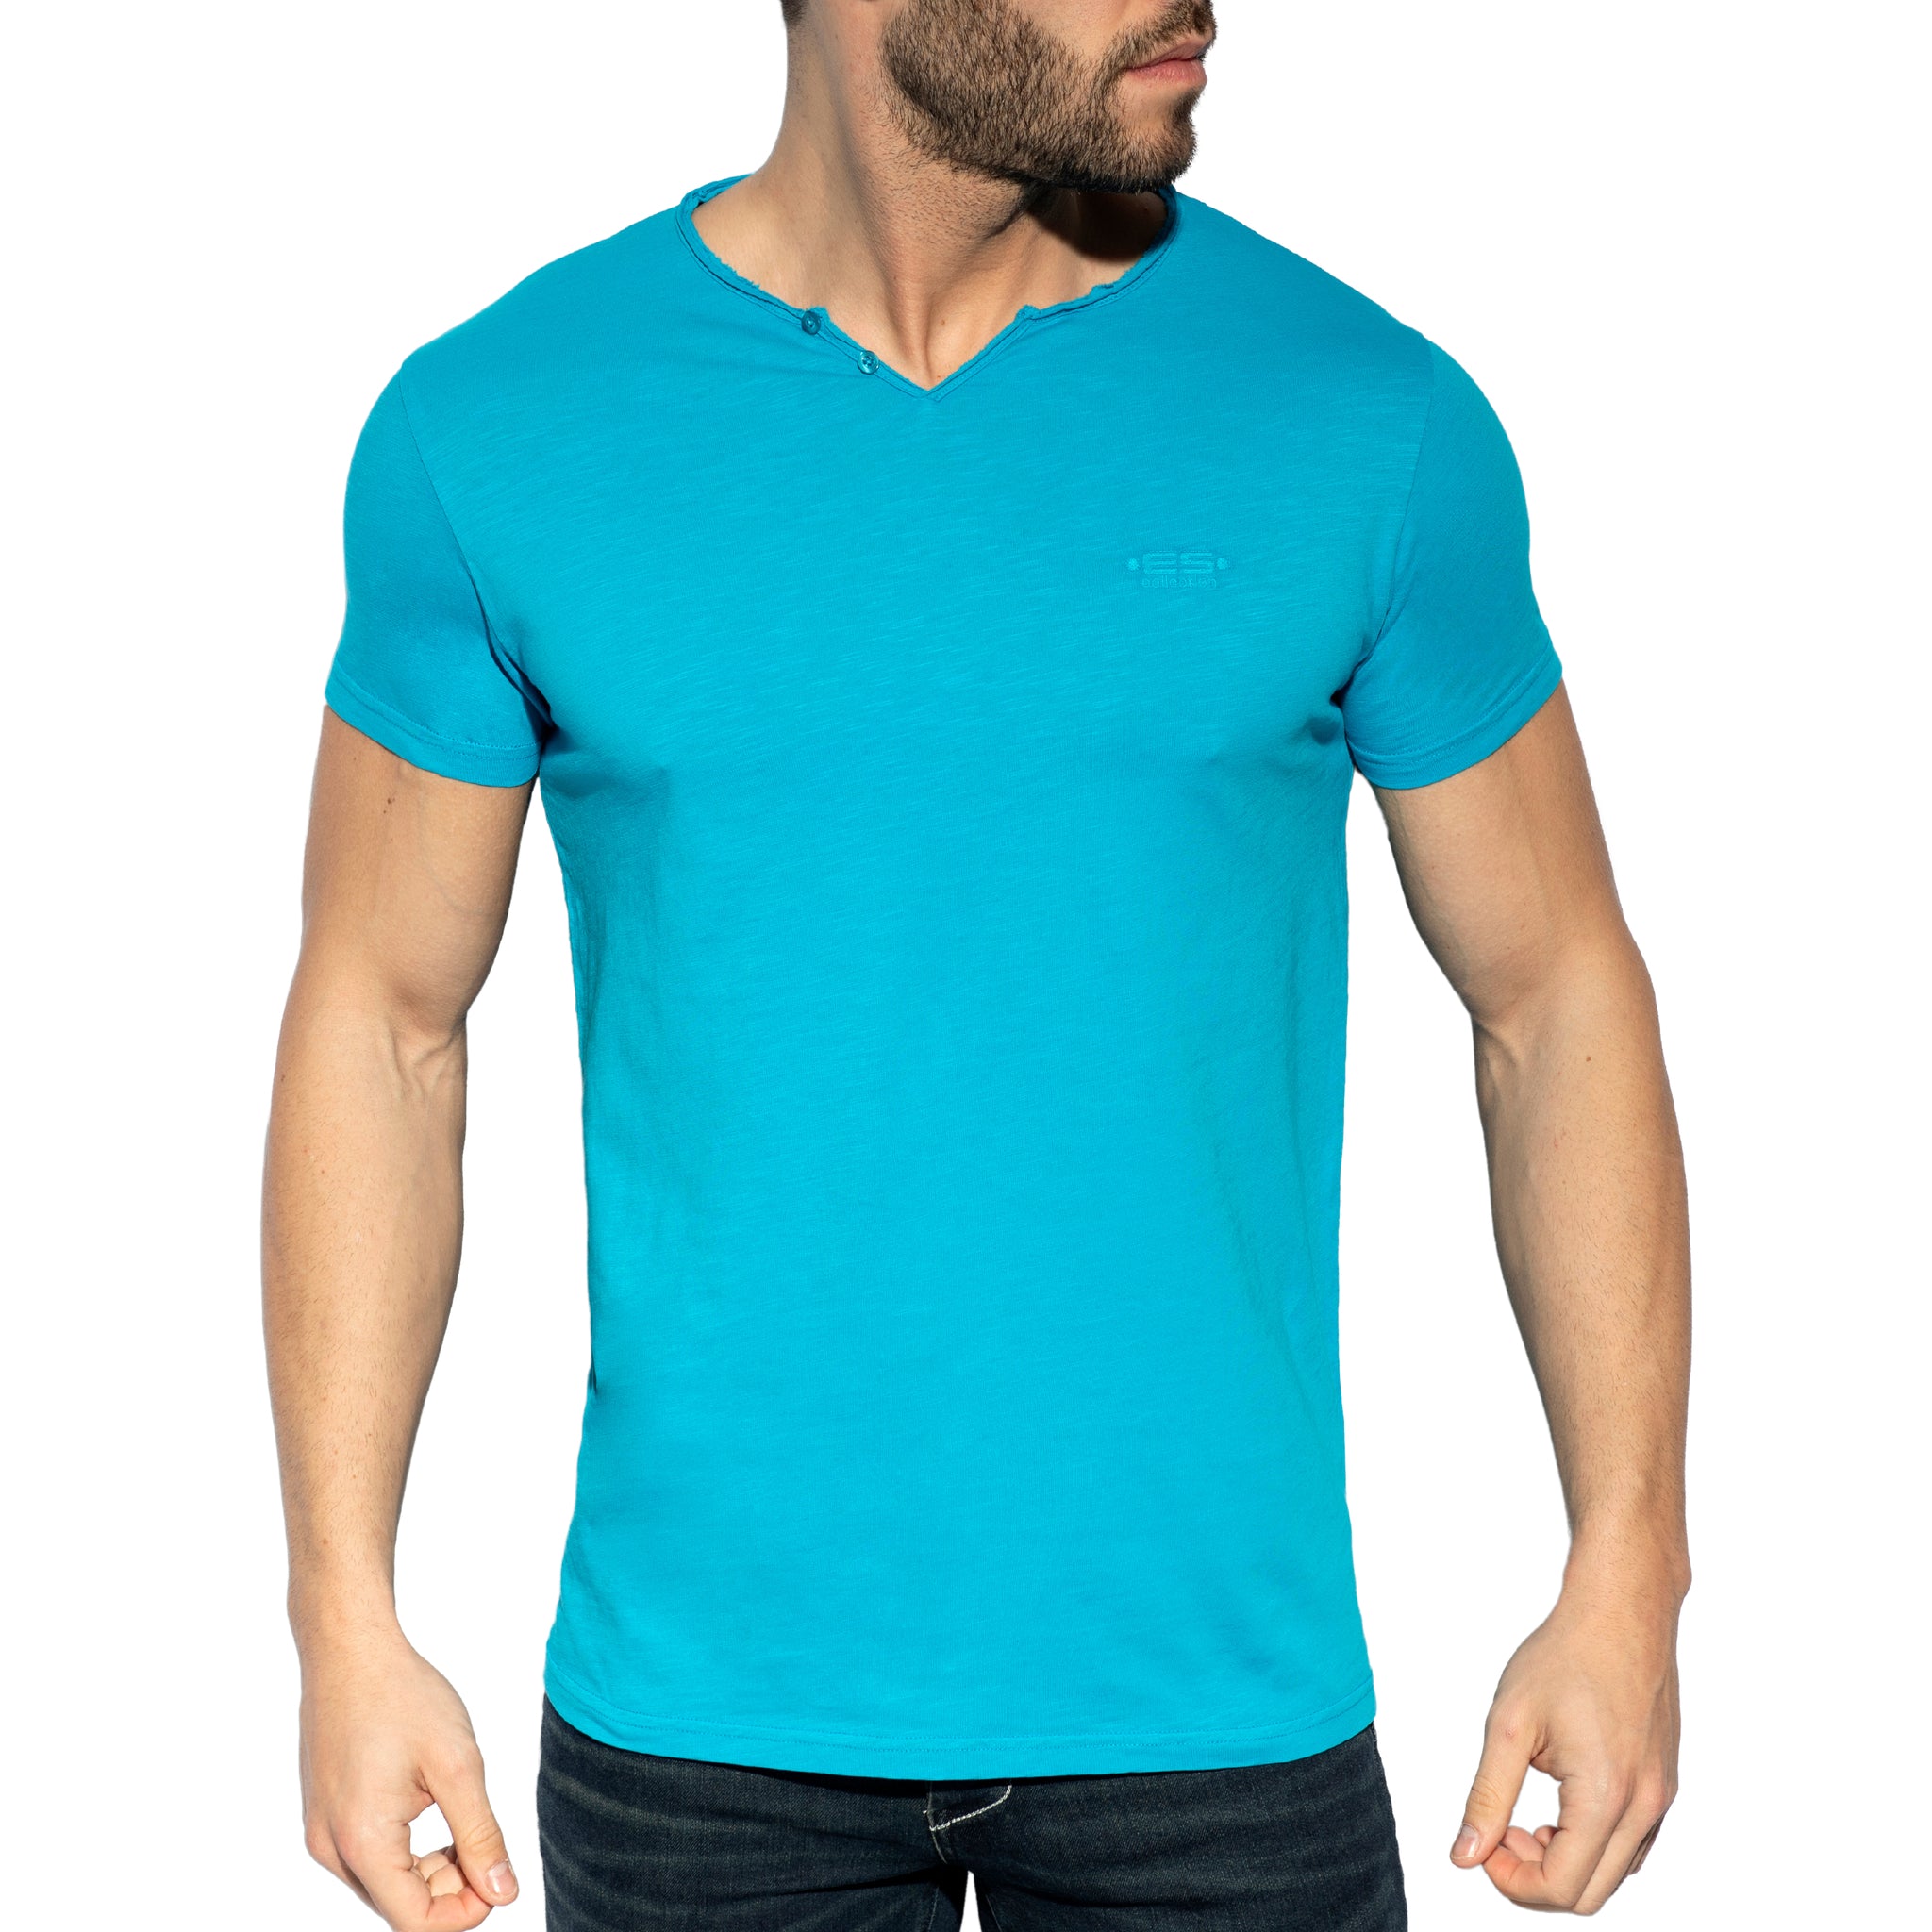 ES Collection Flame Luxury T-Shirt Turquoise TS305